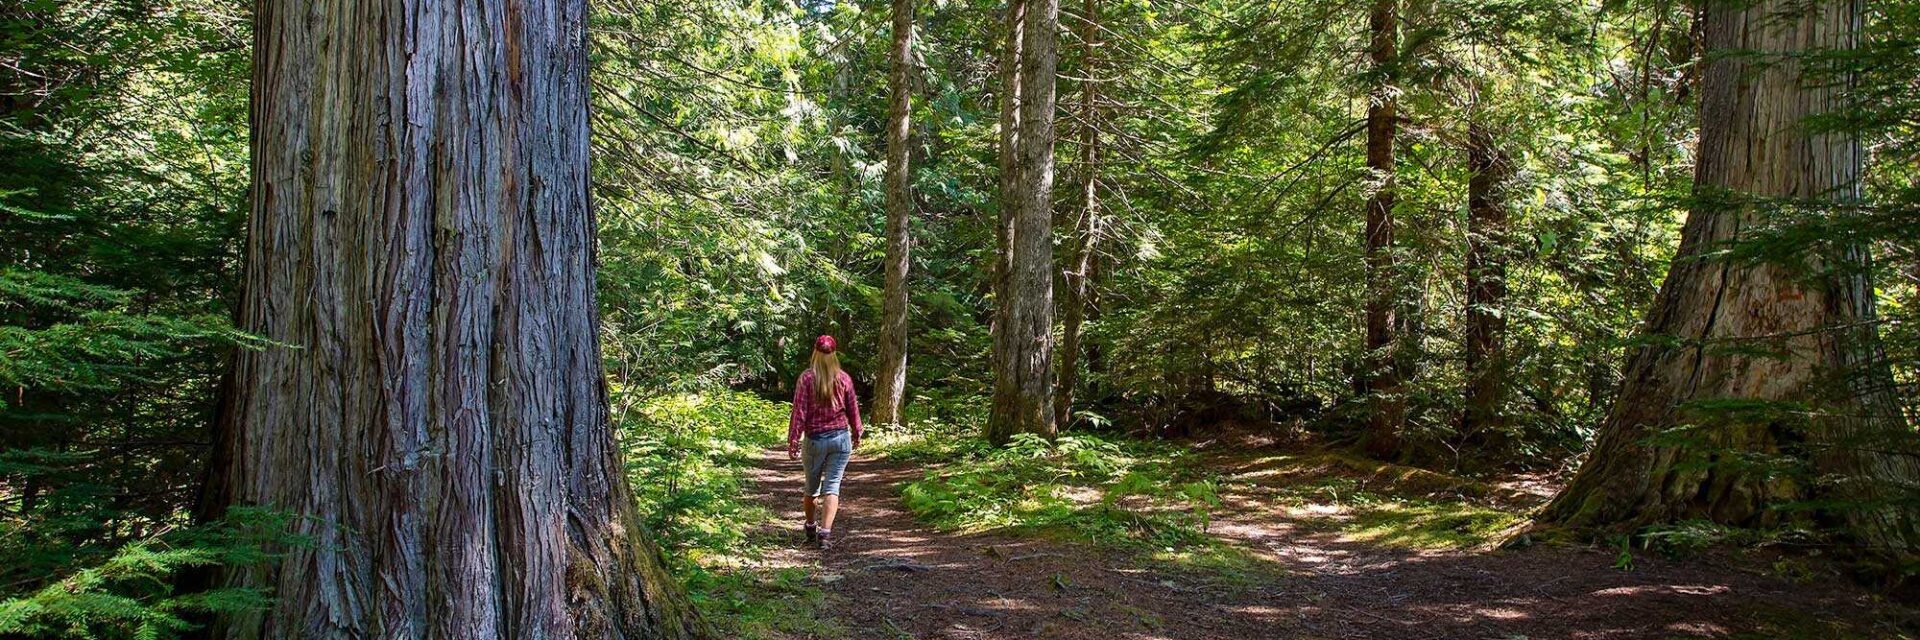 Hiking in Manning Park